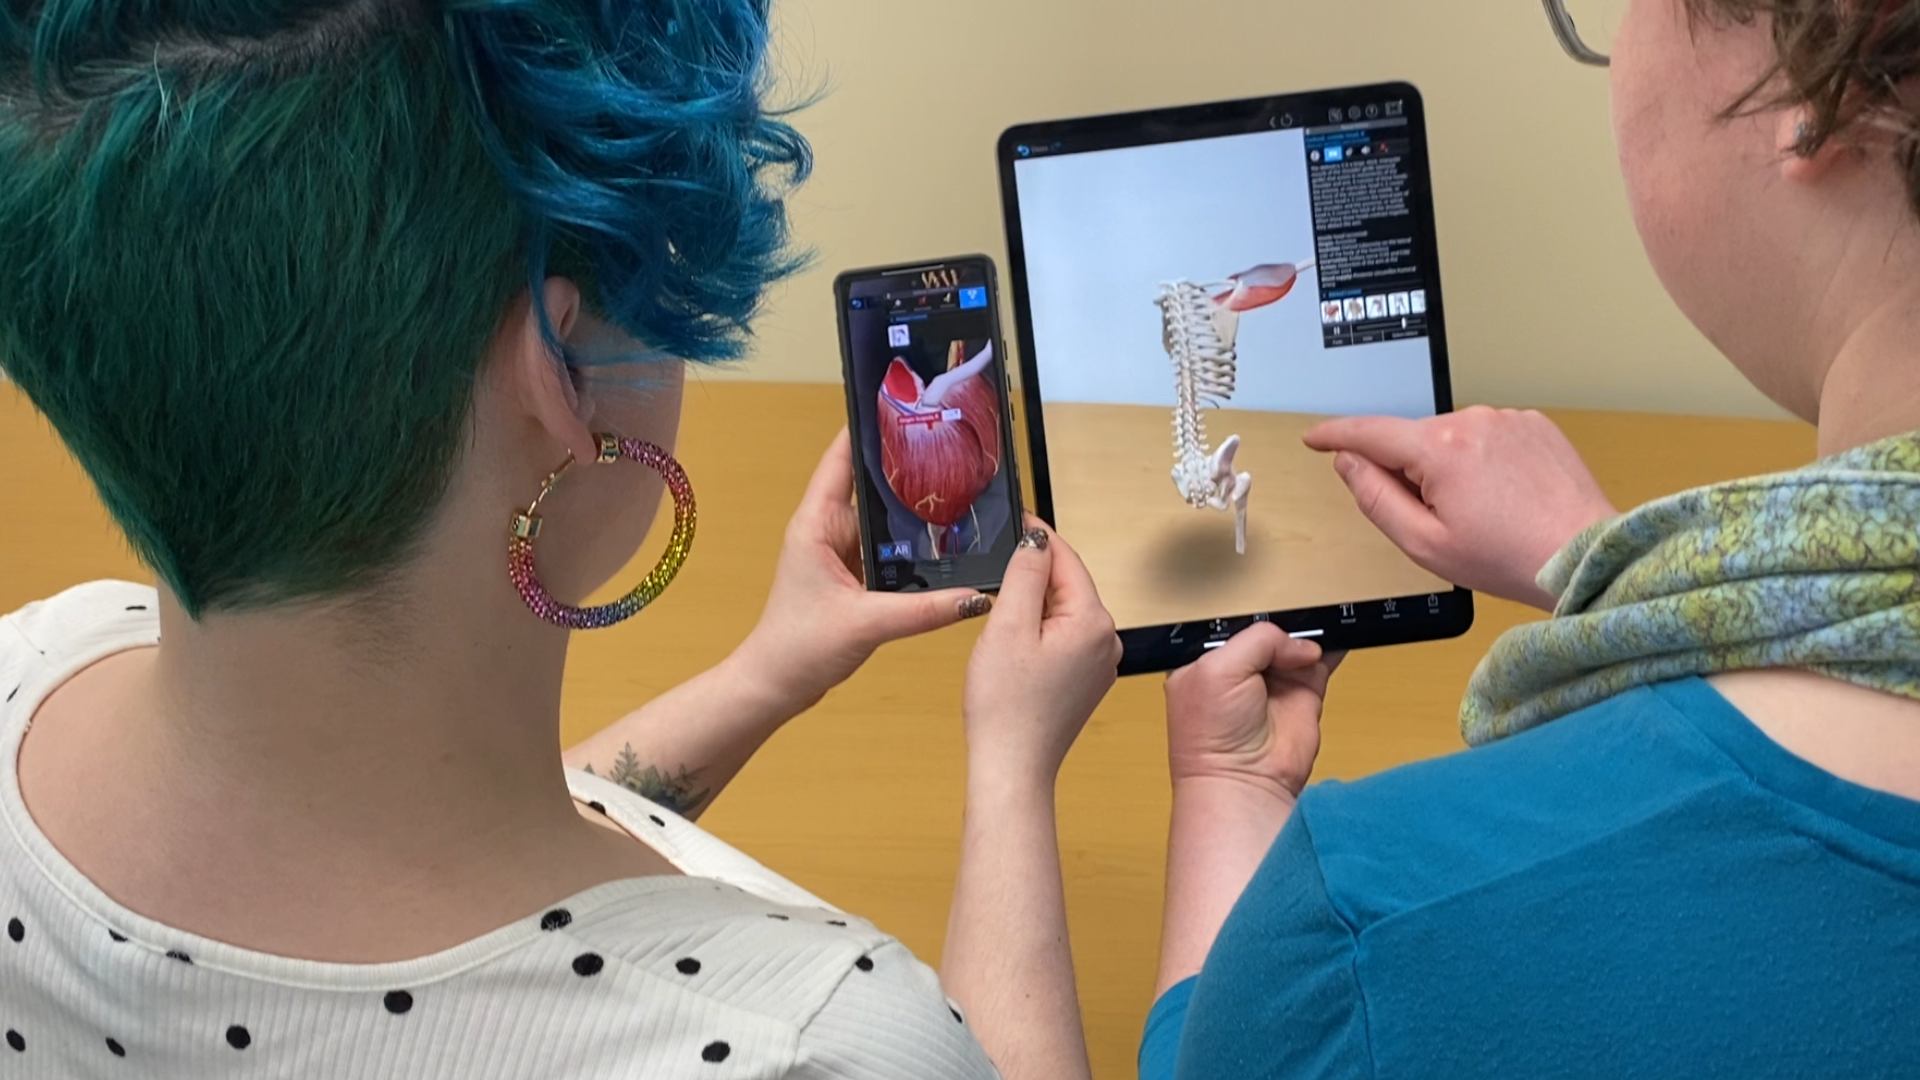 Visible Body's app support augmented reality